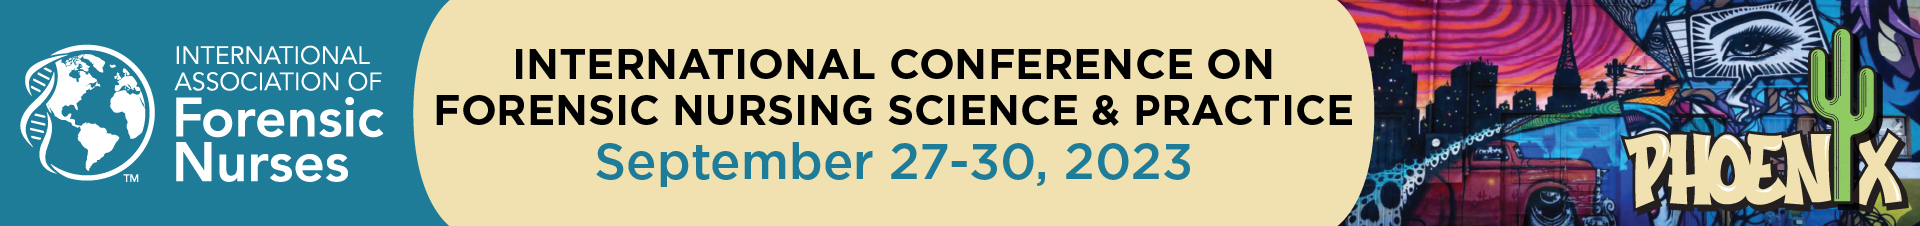 2023 International Conference on Forensic Nursing Science and Practice Event Banner